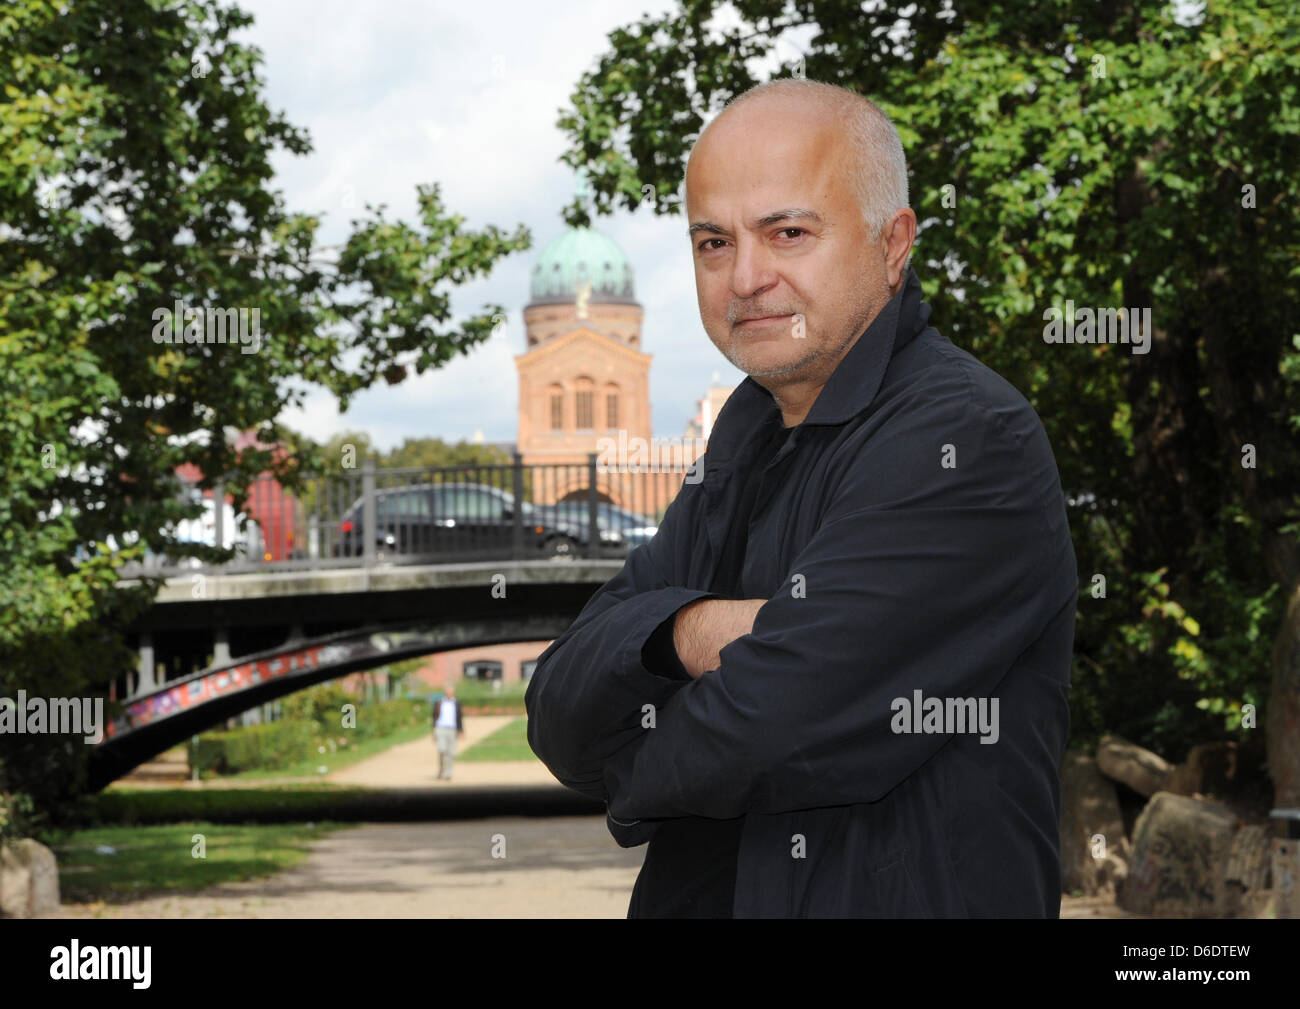 dpa-Exclusive: The artist and architect Yadegar Asisi stands on the bridge on Waldemarstraße with the Sankt-Michael-Kirche (church of saint michael) in the background near the Engelbecken in the Kreuzberg neighbourhood in Berlin, Germany, 12 September 2012. The view of the church was blocked by the Berlin Wall, which used to run along the square and in 1986 Asisi painted a fictiona Stock Photo